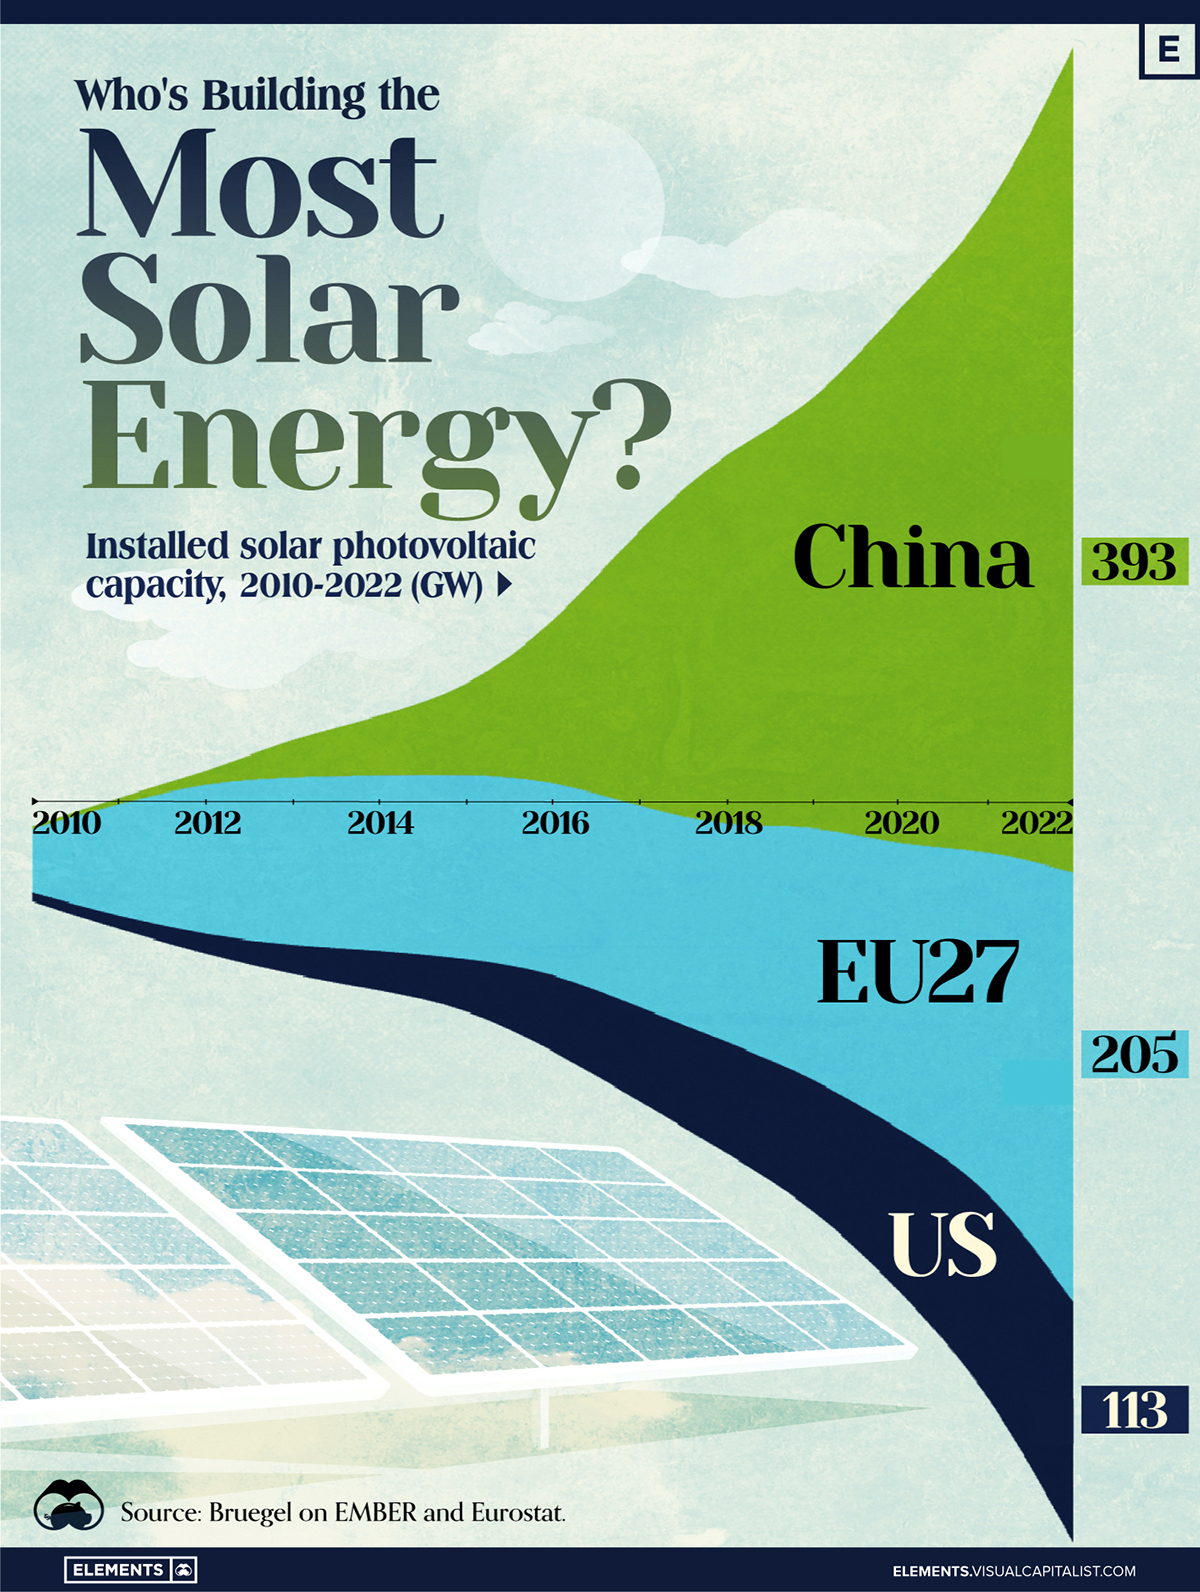 Chart showing installed solar photovoltaic (PV) capacity in China, the EU, and the U.S. between 2010 and 2022, measured in gigawatts (GW).